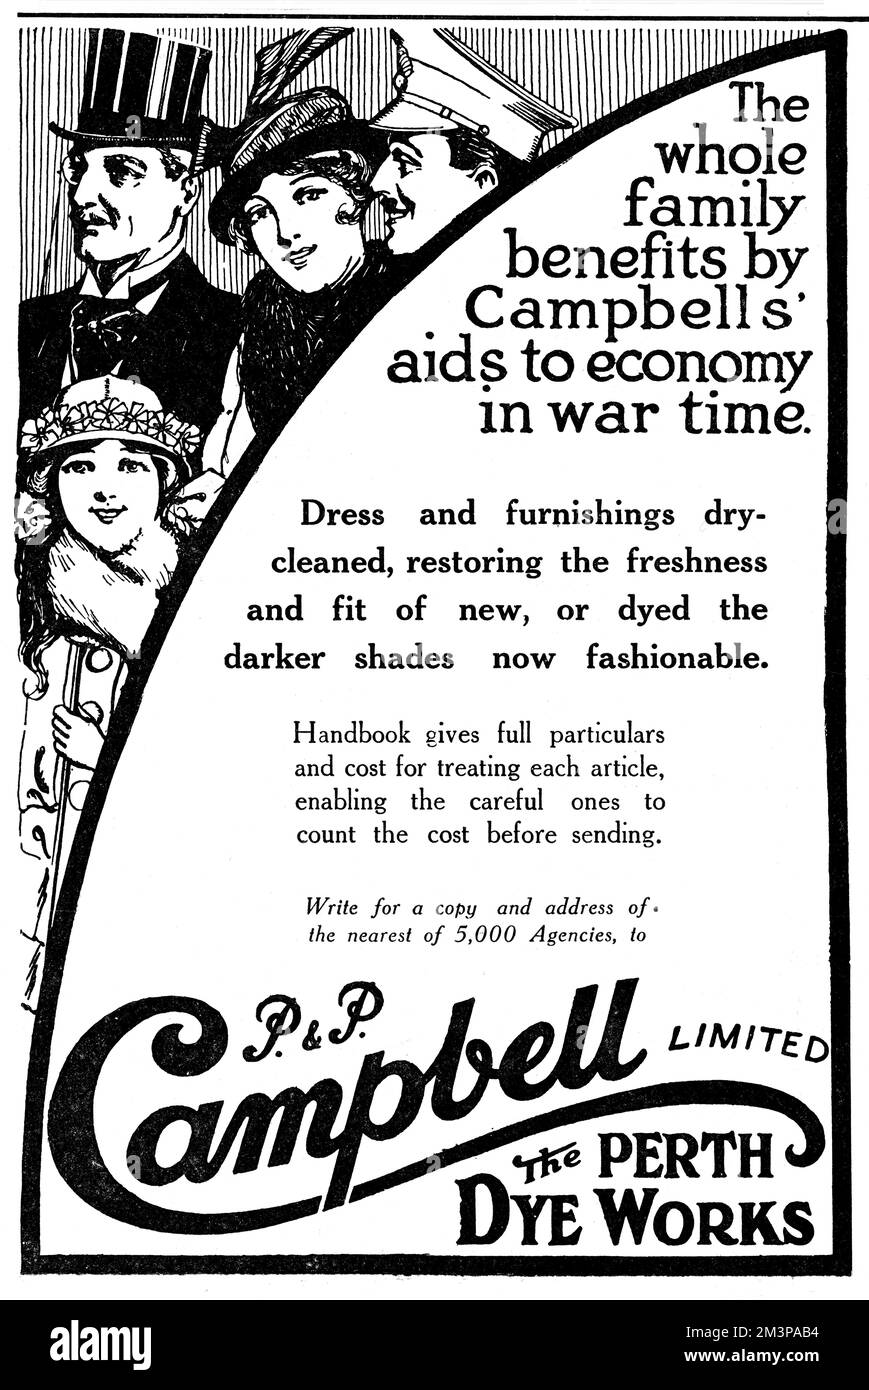 Advertisement for P &amp; P Campbell Limited, Dye Works of Perth, whose dyes in wartime allowed people to practice wartime economy by dry-cleaning or dyeing existing clothes or soft furnishings instead of buying new.       Date: 1915 Stock Photo